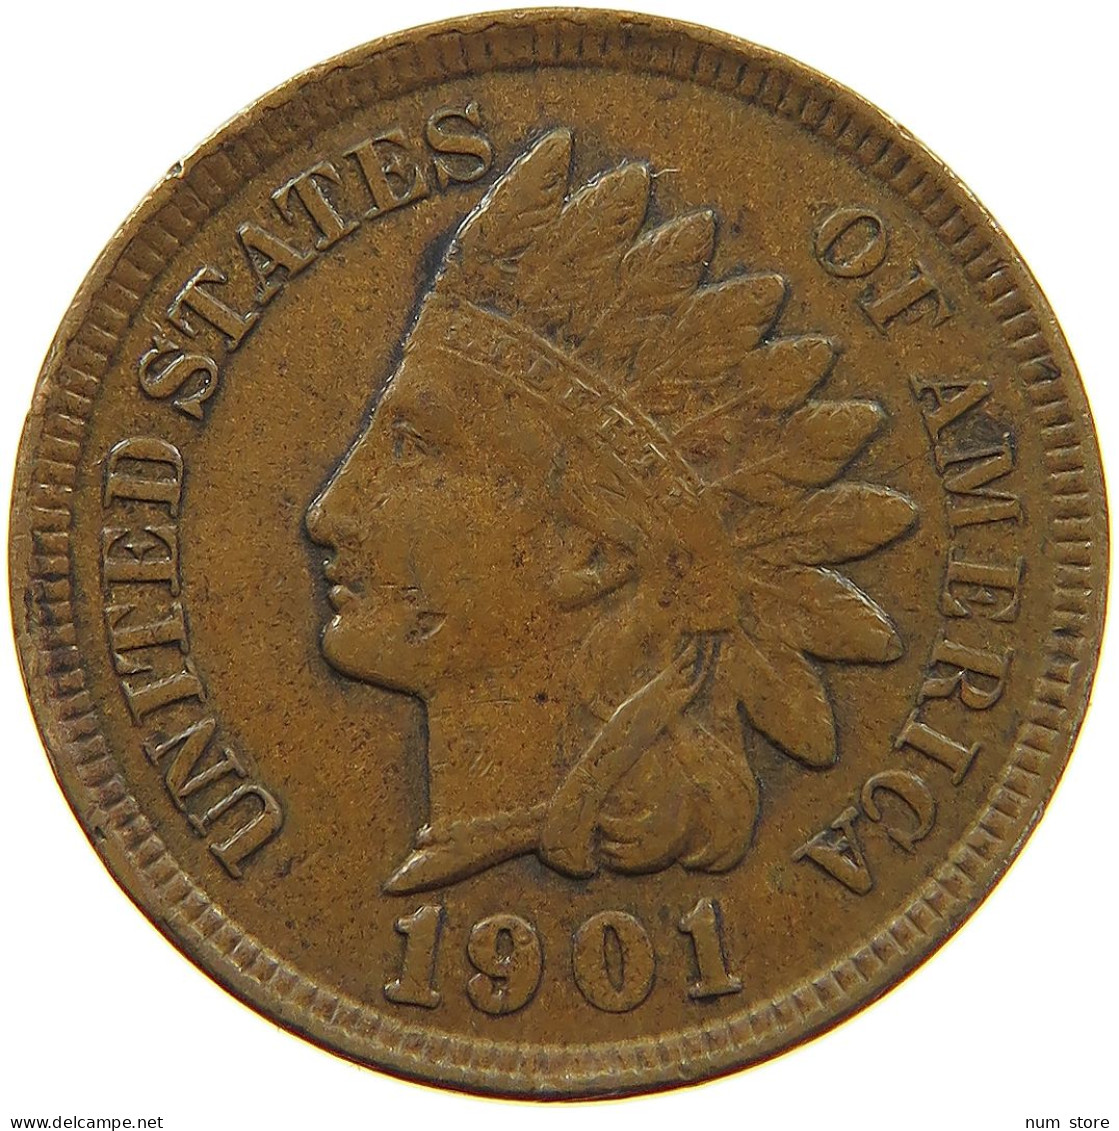 UNITED STATES OF AMERICA CENT 1901 INDIAN HEAD #a013 0341 - 1859-1909: Indian Head